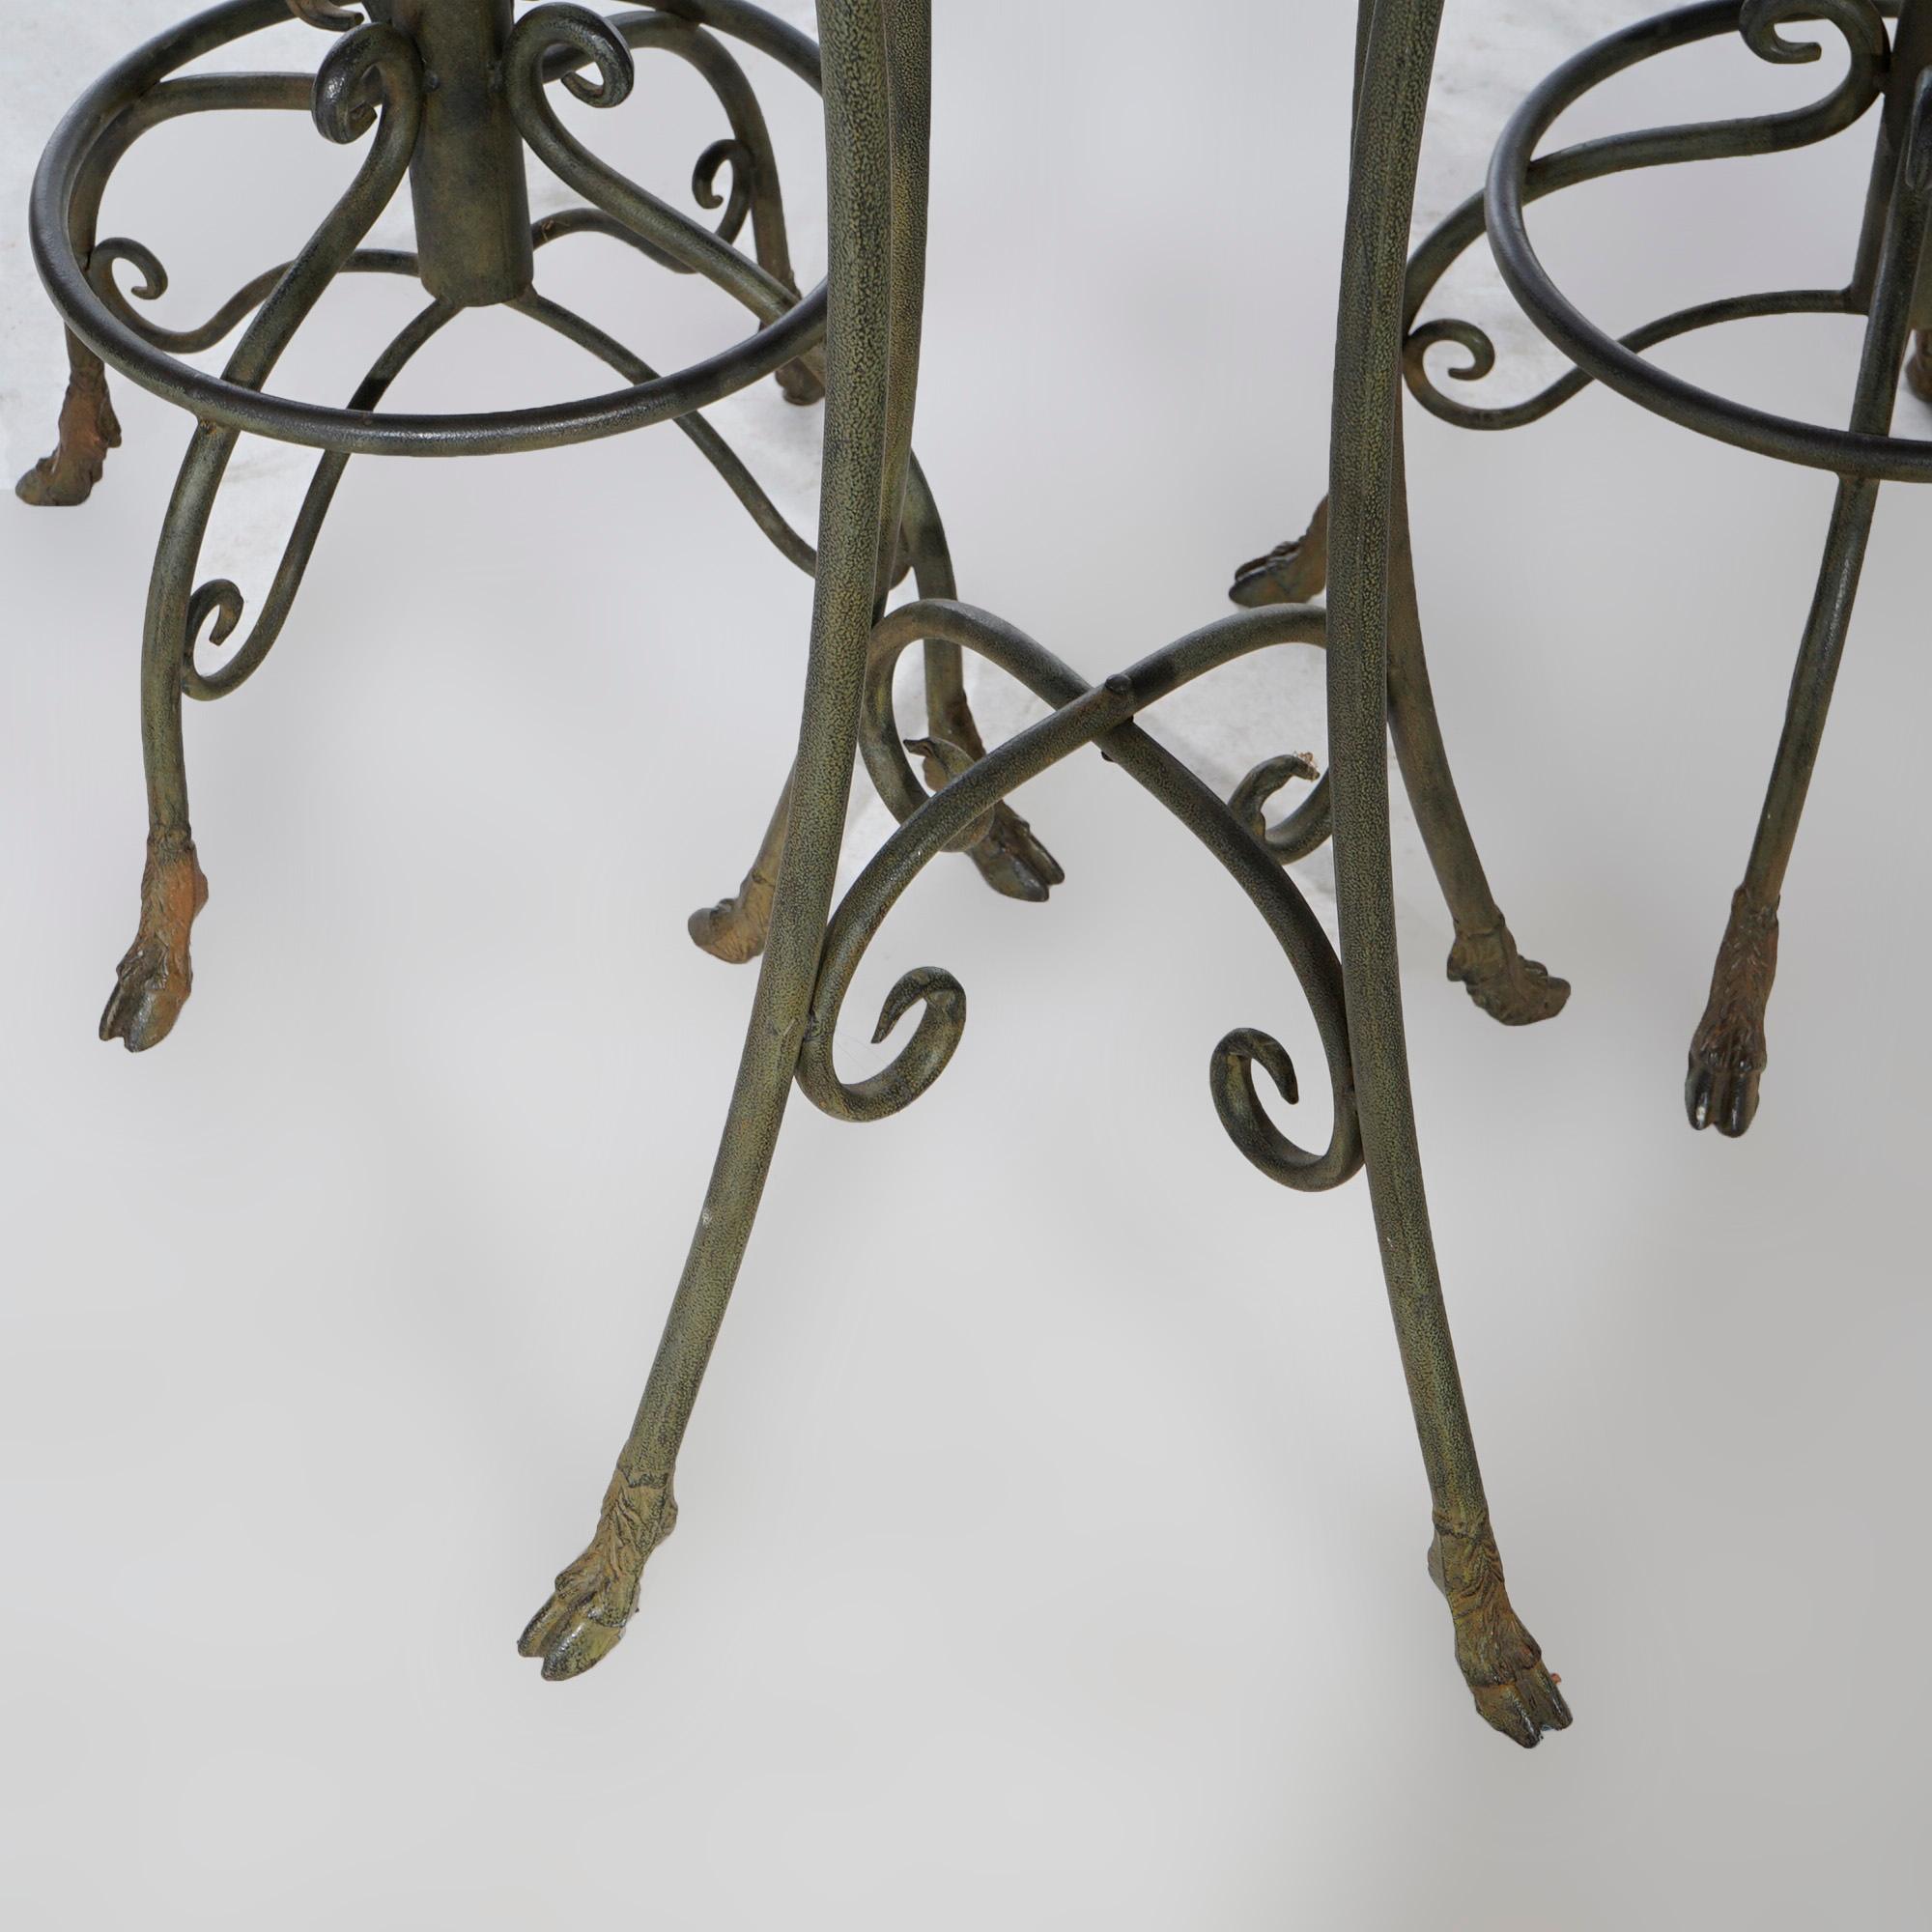 Figural Wrought Iron & Slate Pub Table & Chairs with Satyr Heads & Hoof Feet 11